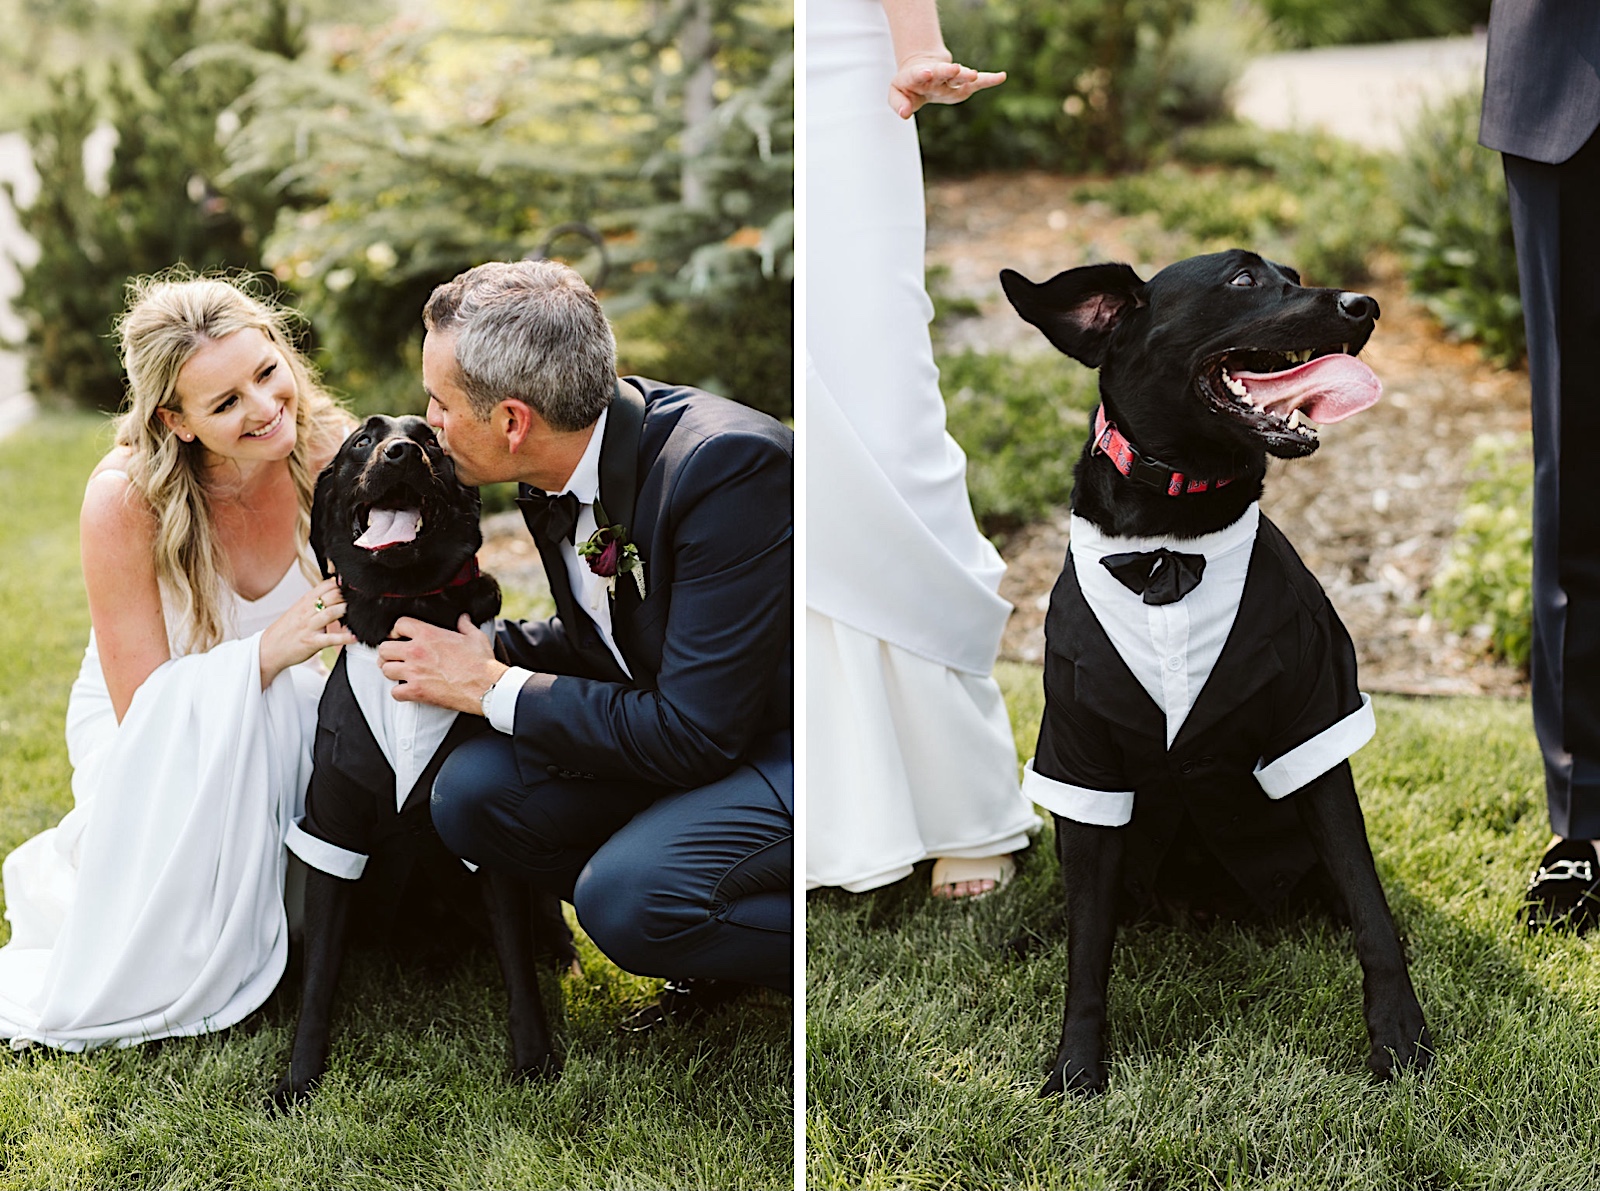 Vibrant Wedding At Siren Song Vineyard: bride and groom with their dog